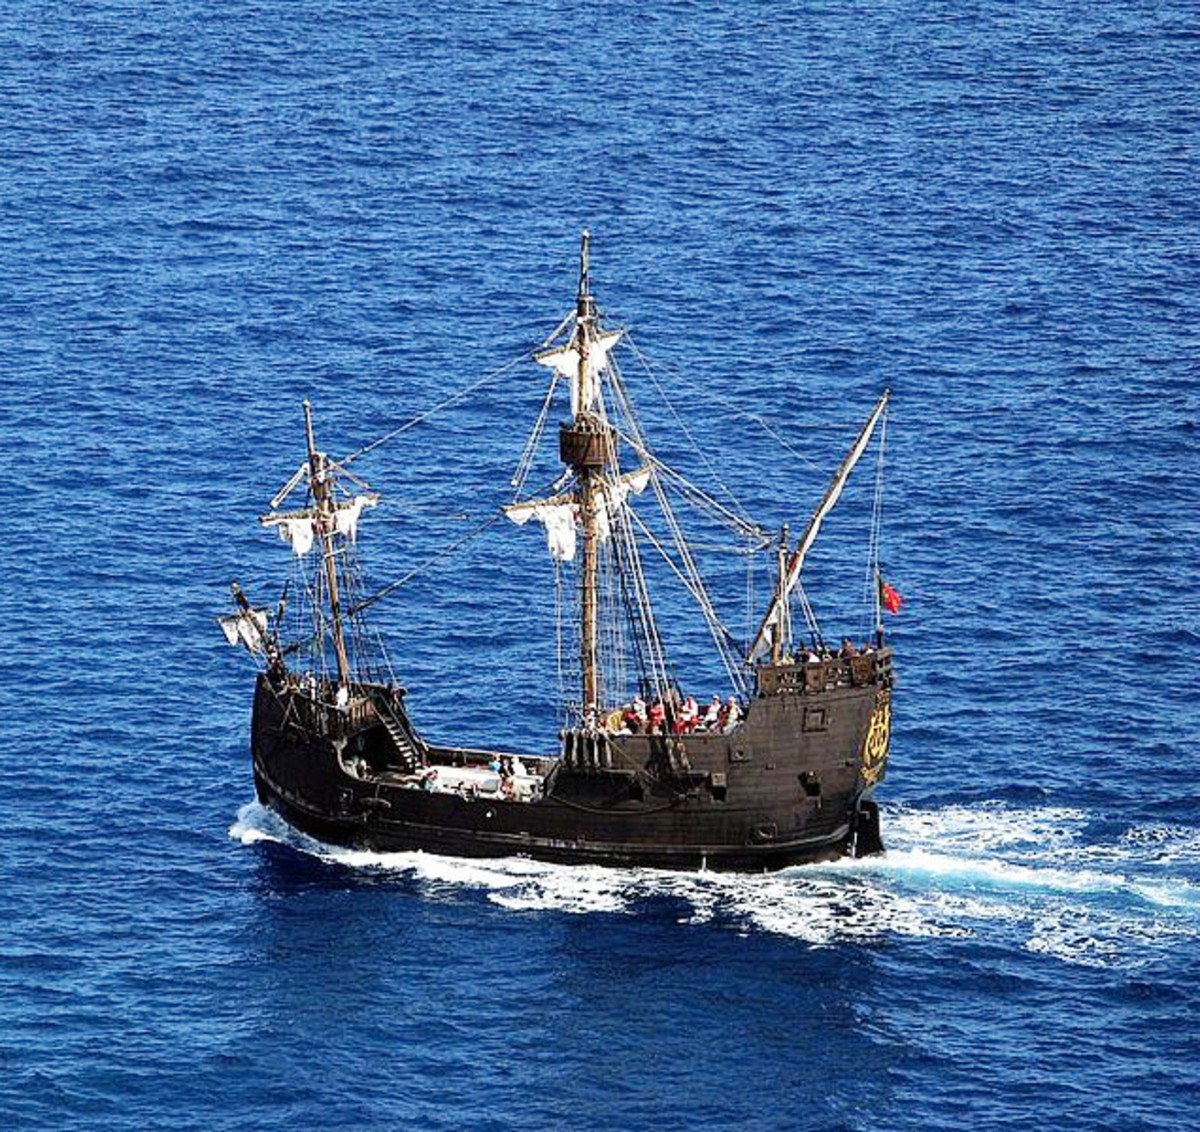 Leo-setä photographed this replica of Columbus's ship Santa Maria in Funchal, Madeira on May 26, 2008.